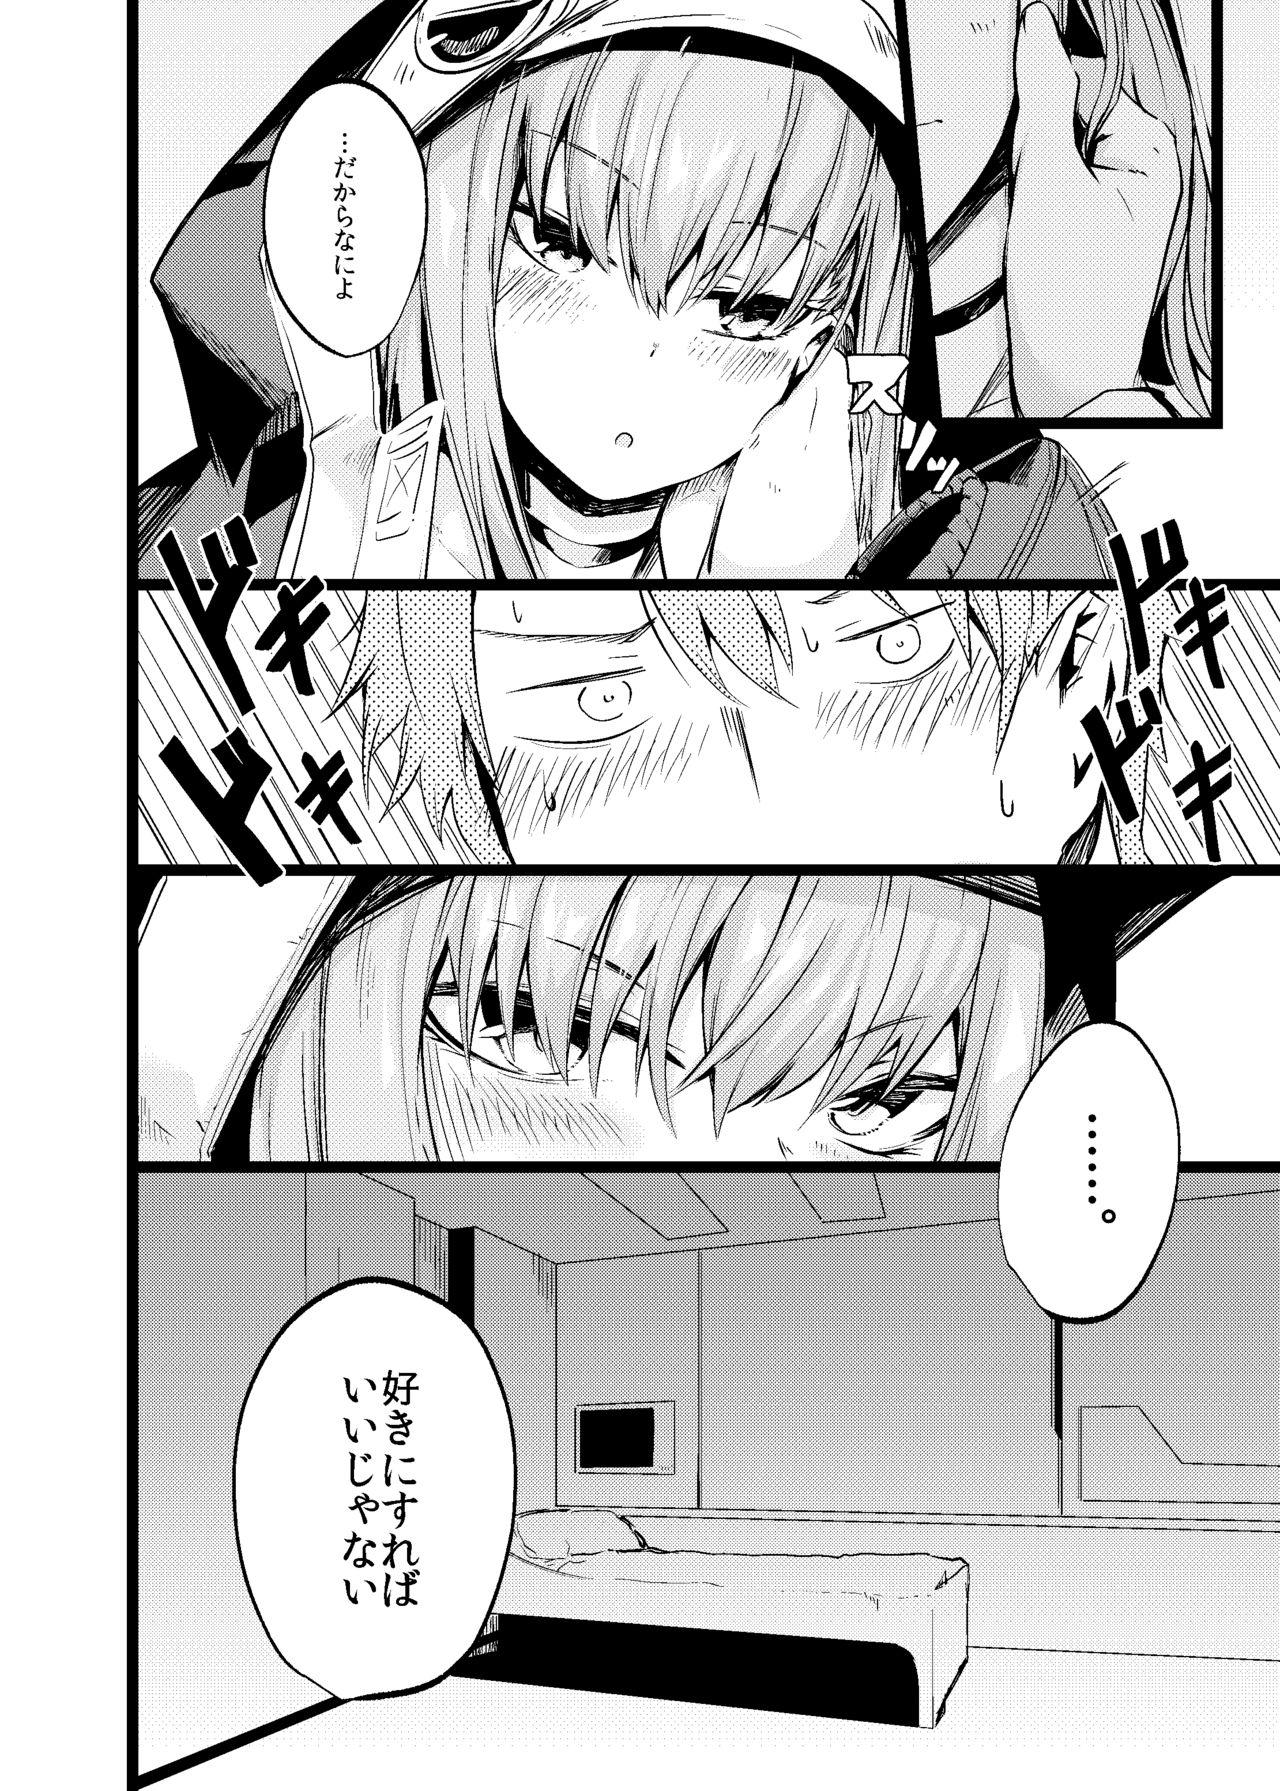 Deepthroat Mizugi na Meltlilith-san to - Fate grand order Submission - Page 7